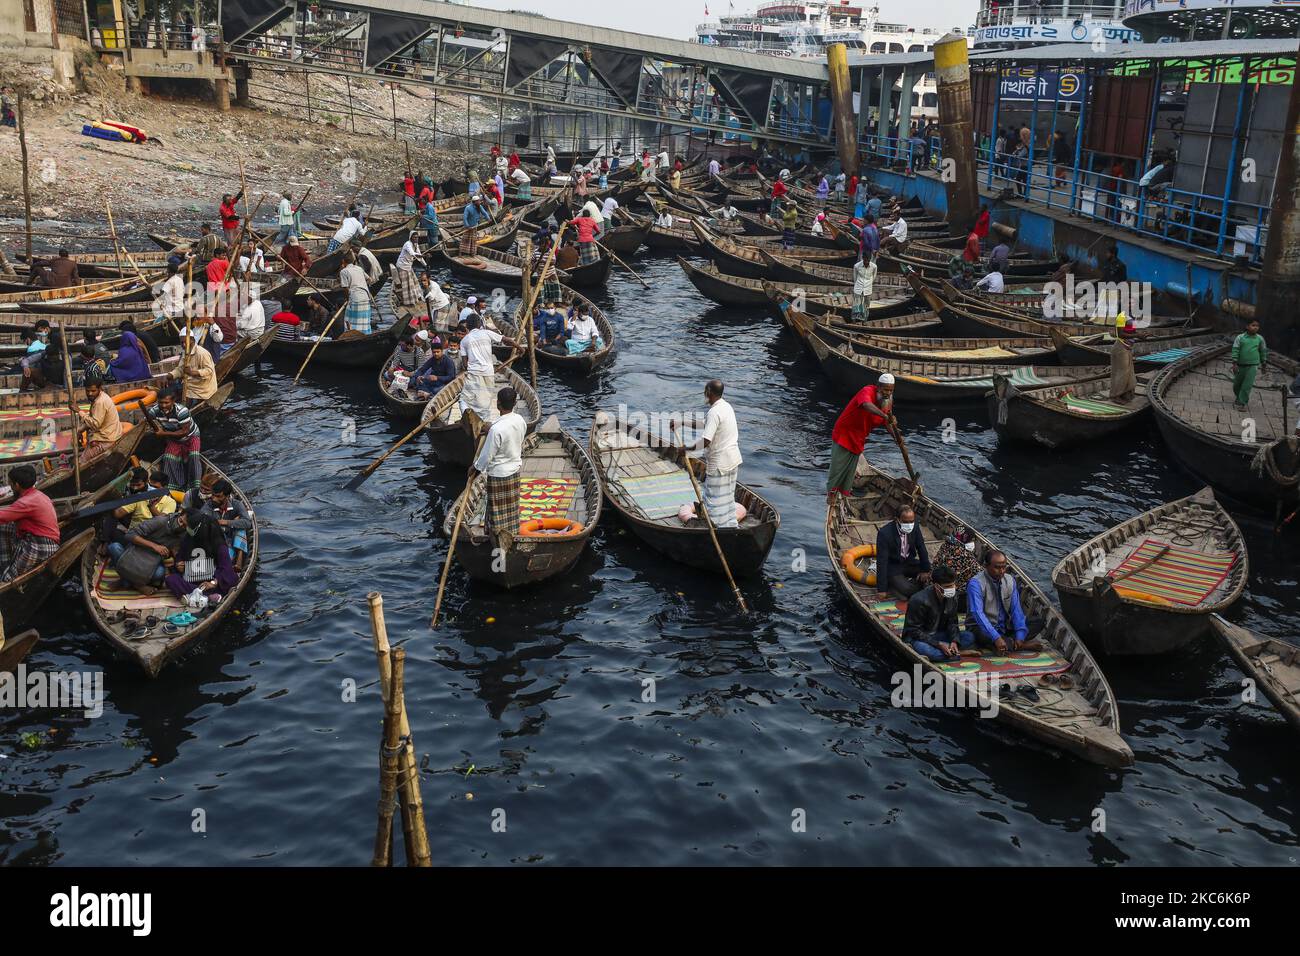 Boatmen load passengers on their boats to take them across the River Buriganga at the Sadarghat terminal in Dhaka on December 29, 2020.The Buriganga is economically a very important river for the capital. Launches and boats connect the capital to other parts of this riverine country through the Buriganga. (Photo by Ahmed Salahuddin/NurPhoto) Stock Photo